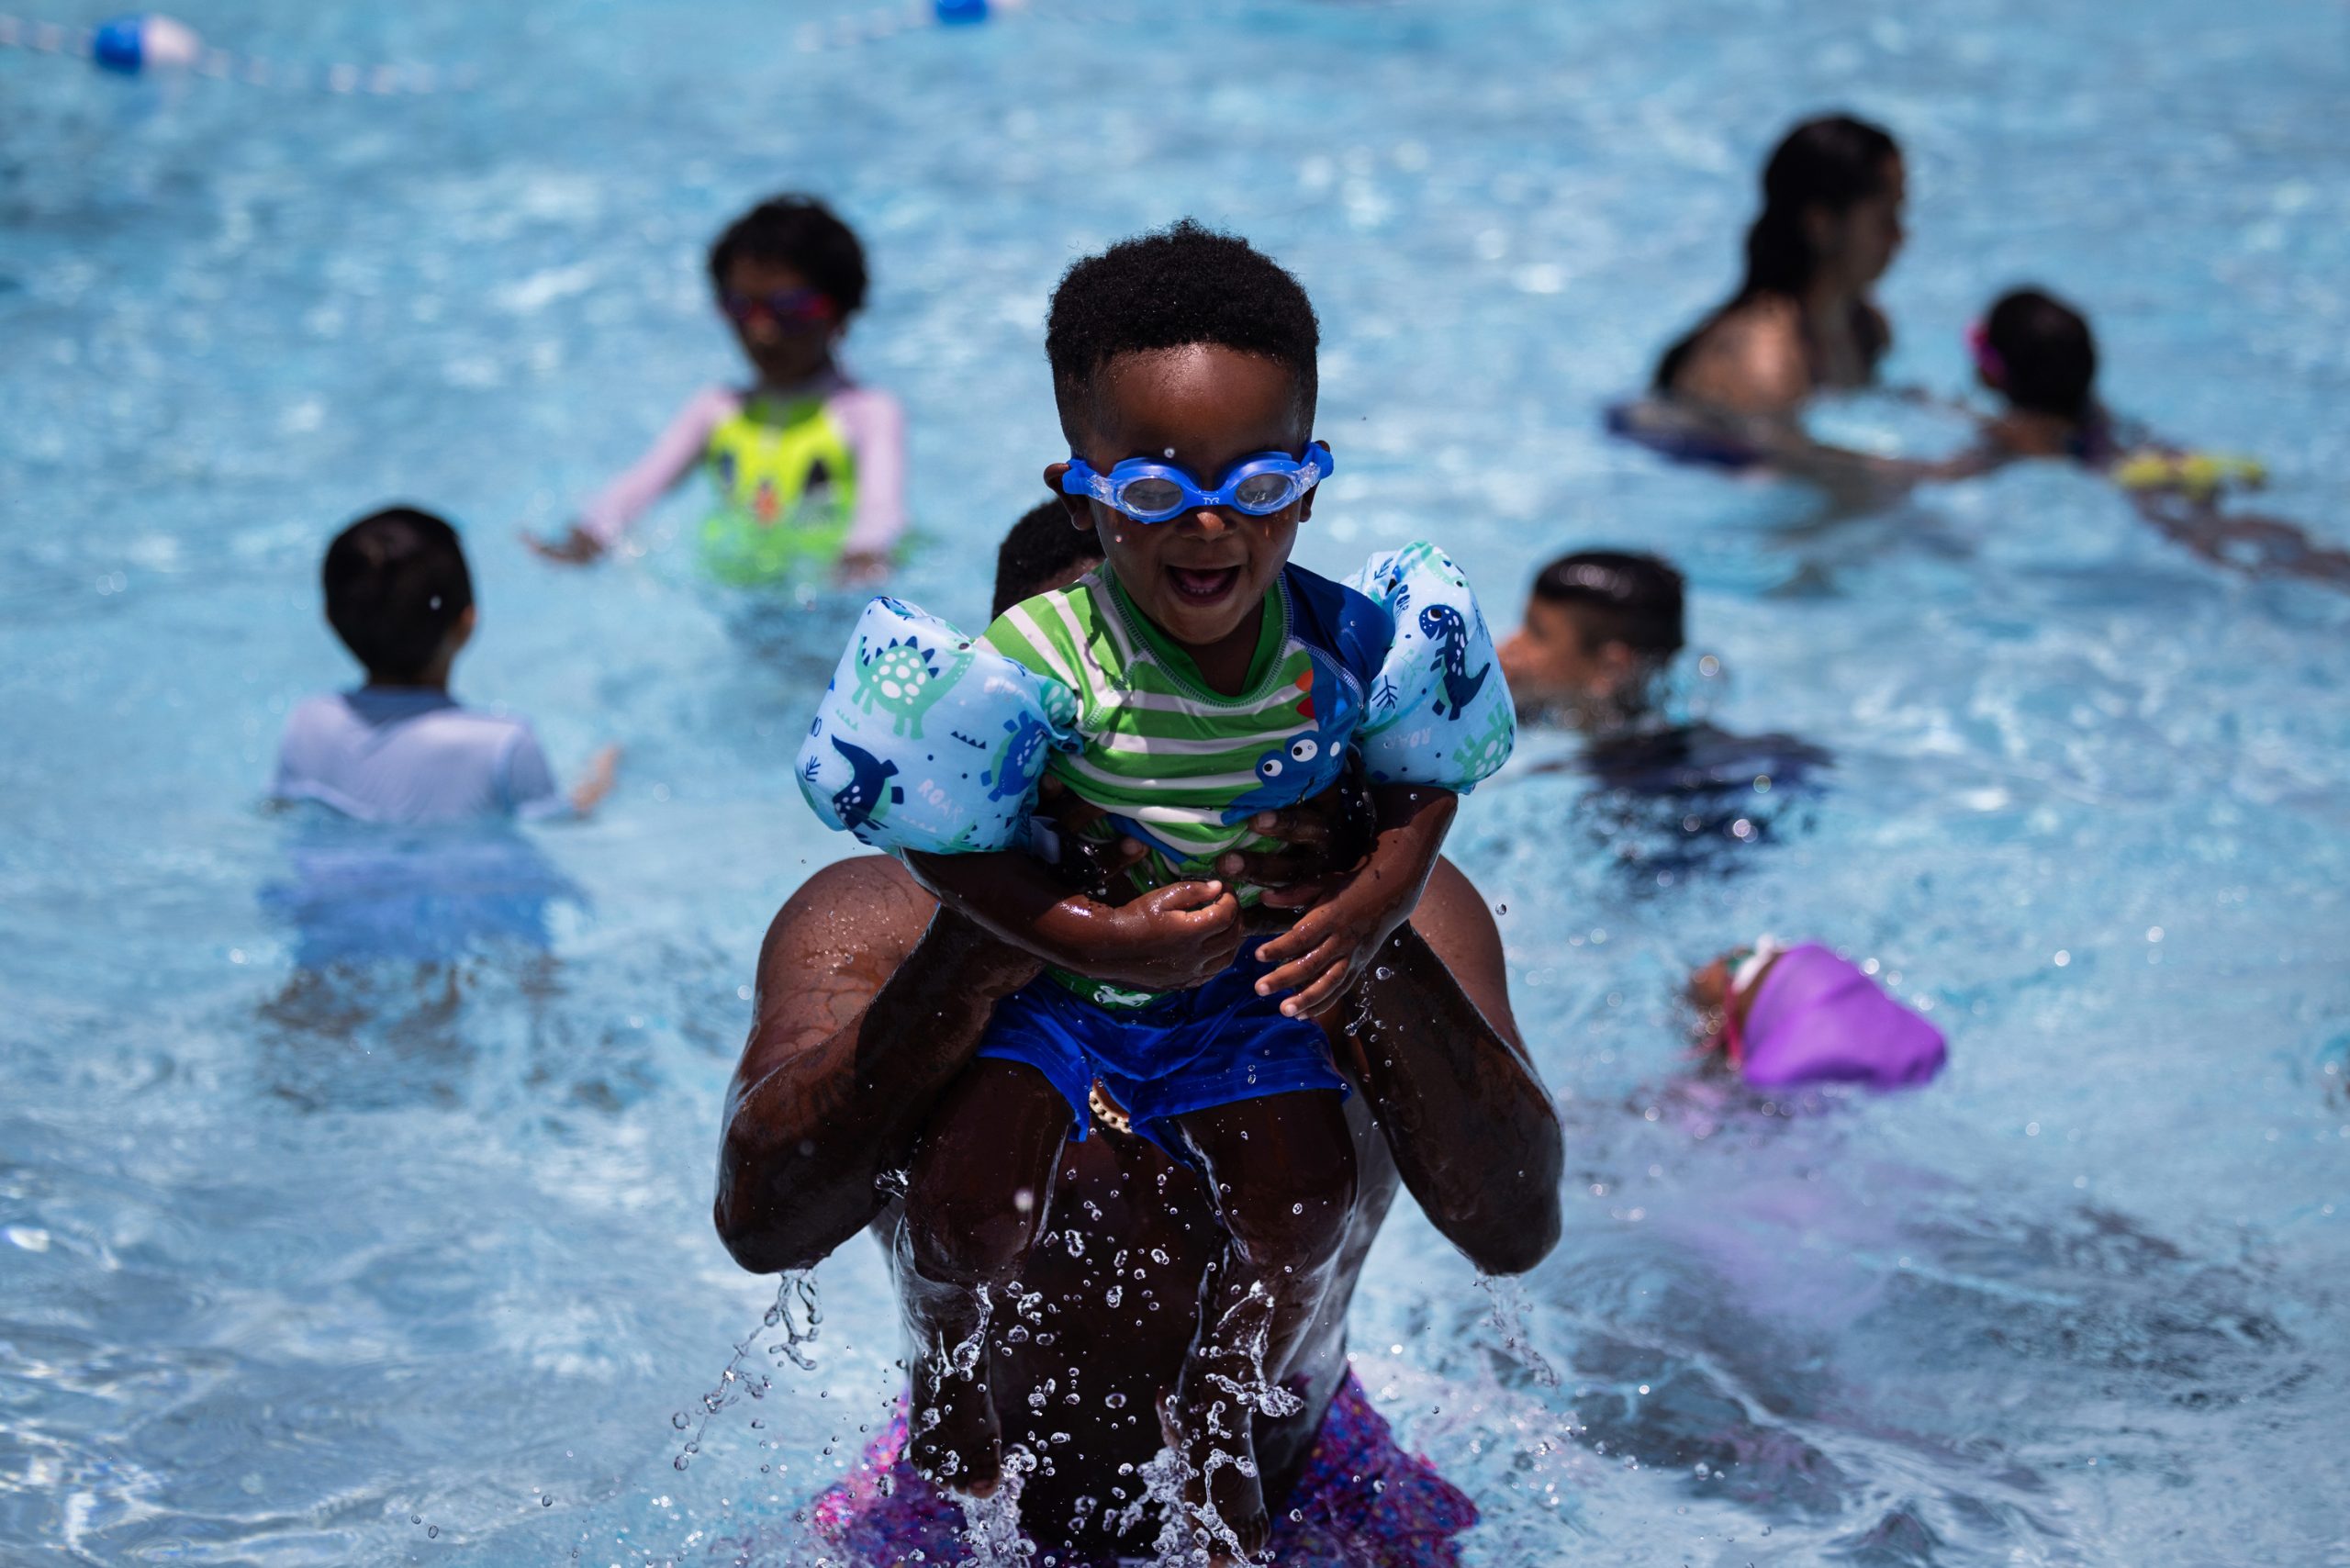 Sincere Gray, 2, is playfully lifted to the air by his father Derius Gray while enjoying the Alief Neighborhood Center and Park pool facilities.